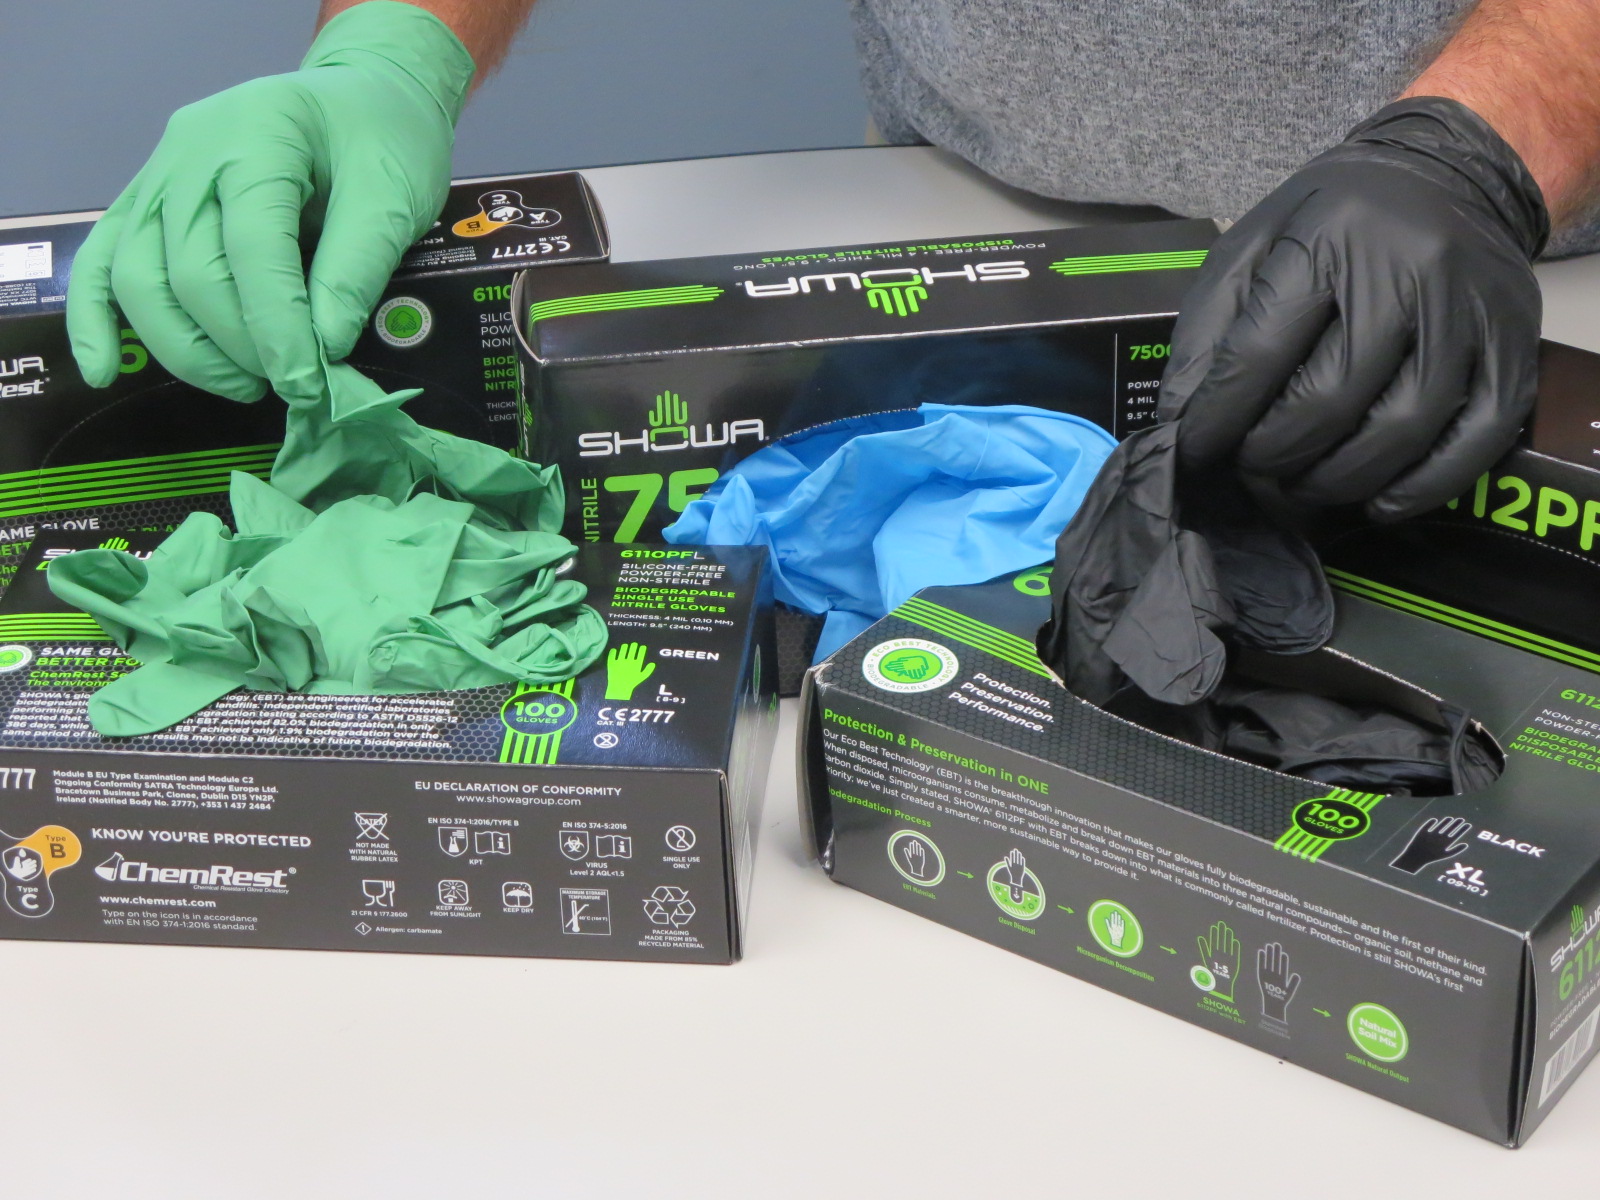 SHOWA® biodegradable single-use nitrile gloves featuring EBT Technology